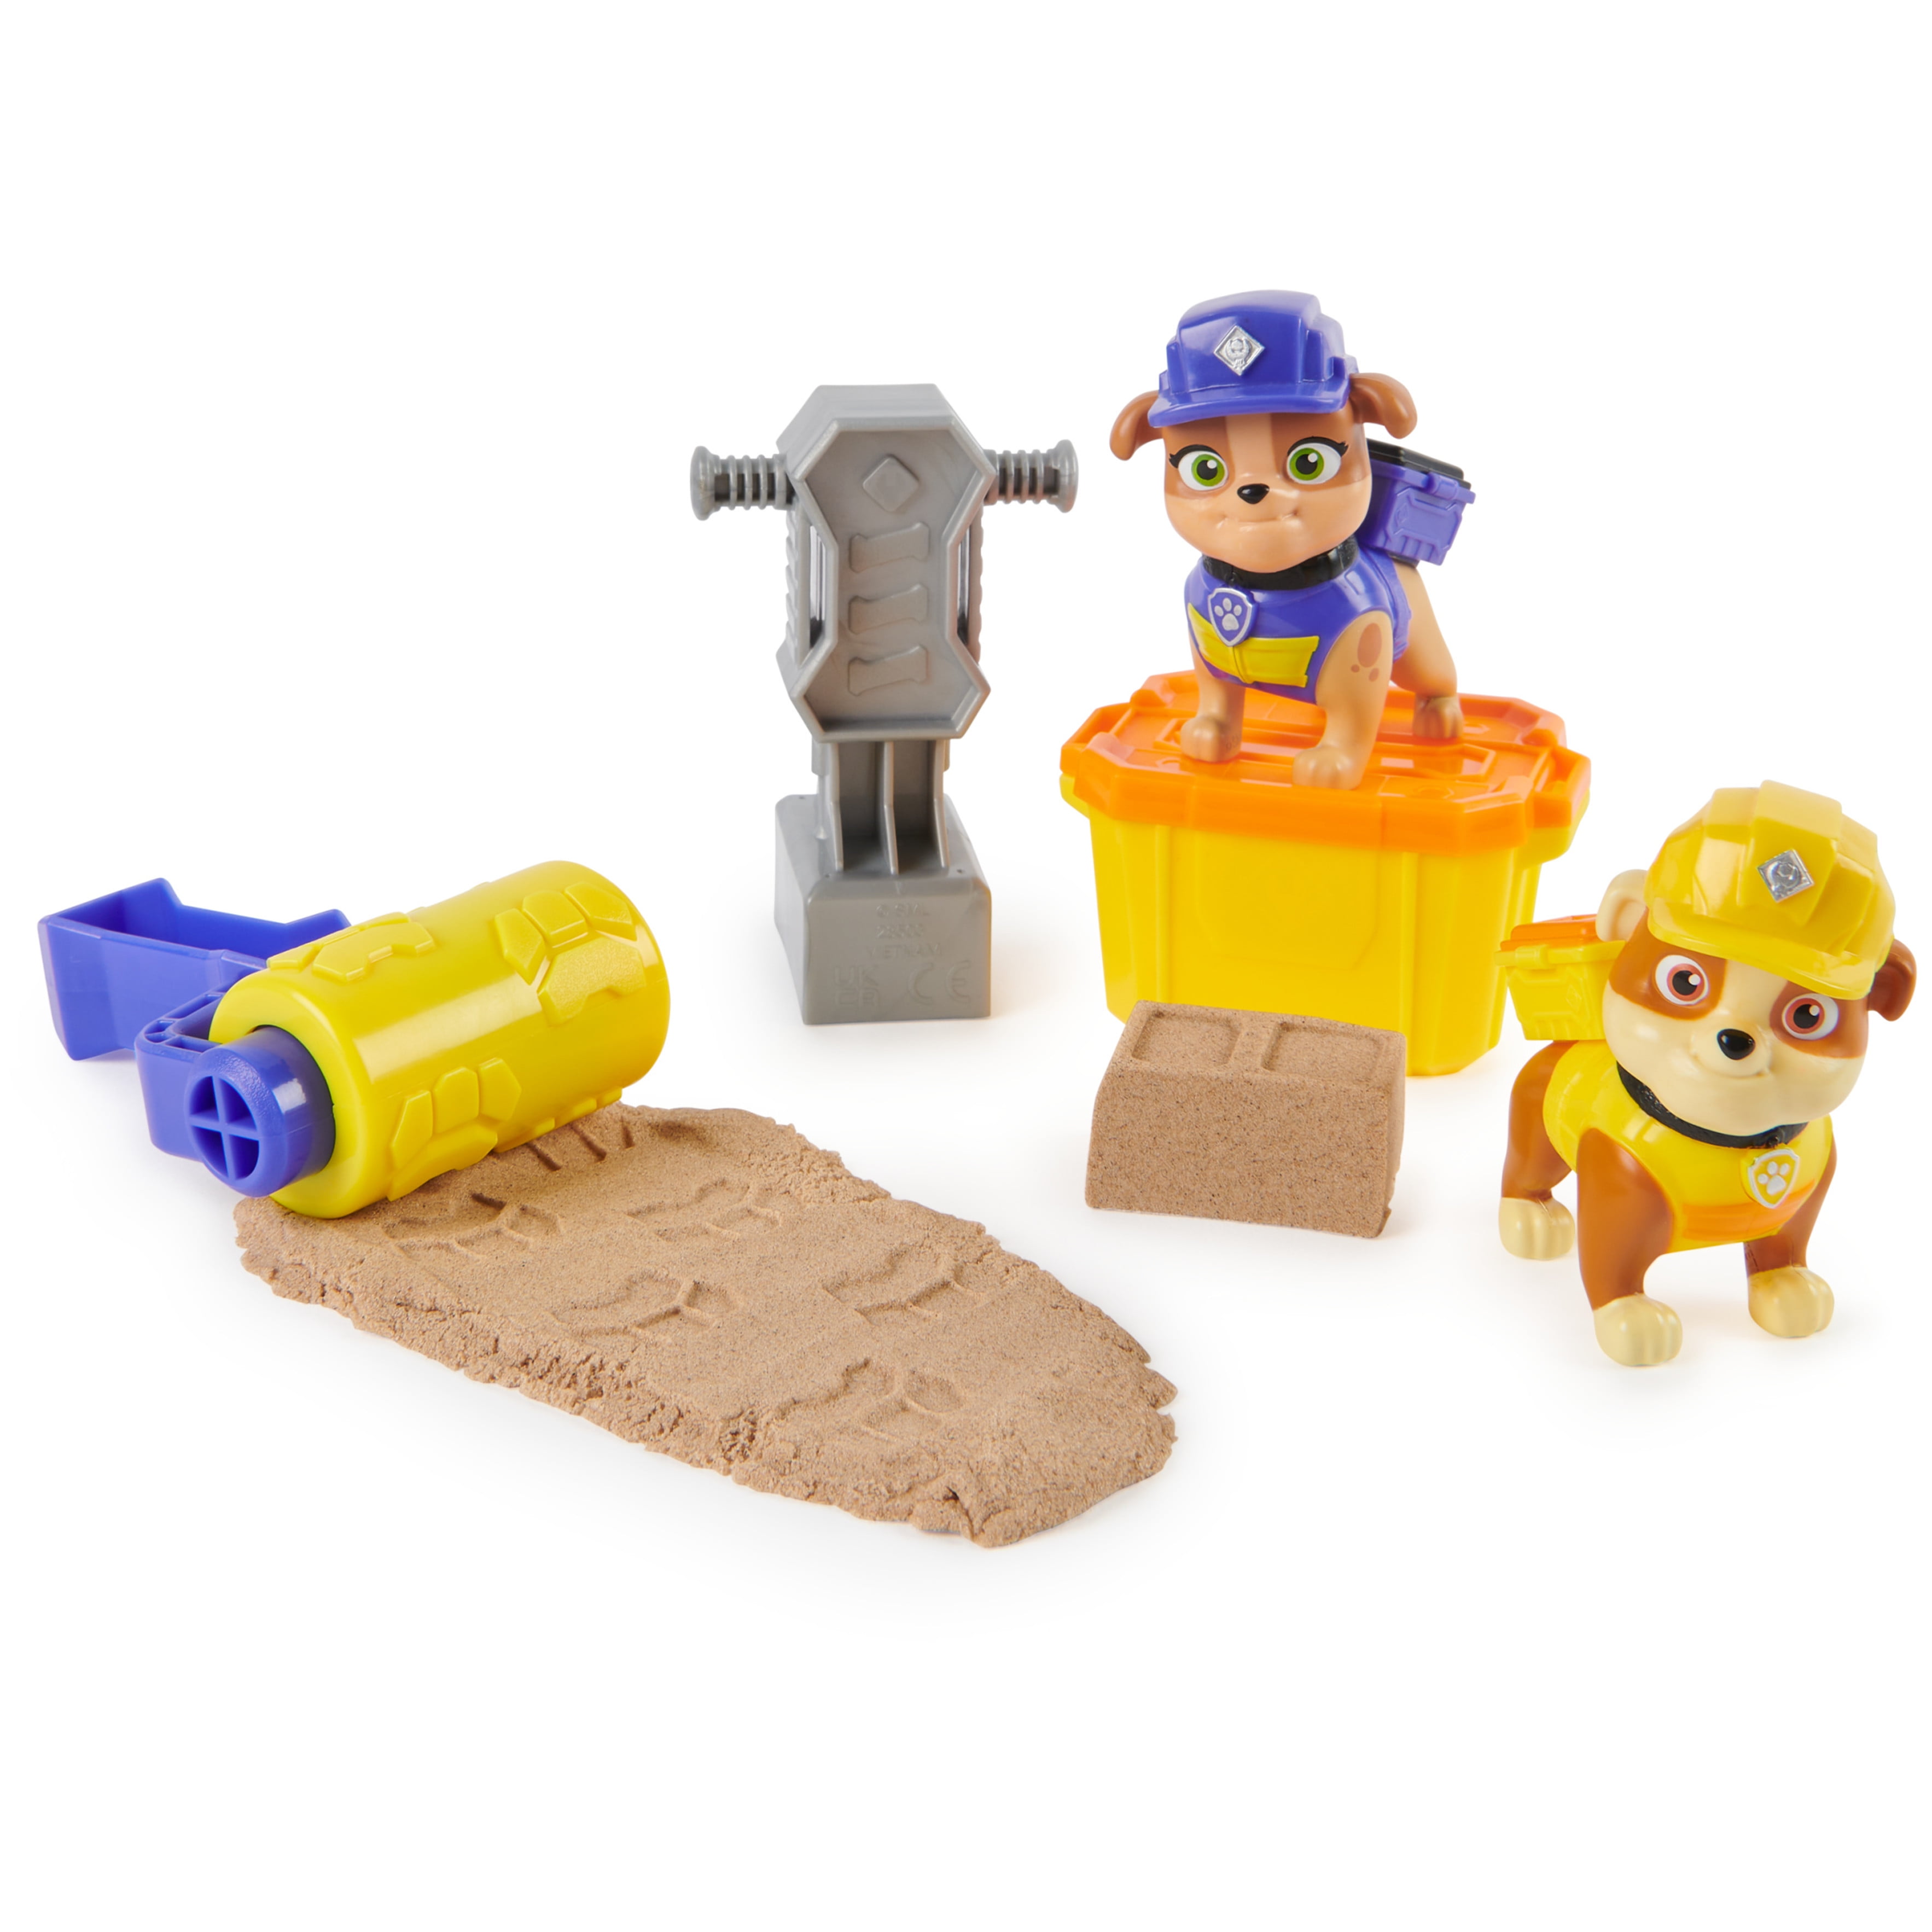 Rubble & Crew, Rubble and Mix Figures with Kinetic Build-It Sand and Toy Tools for Kids 3+